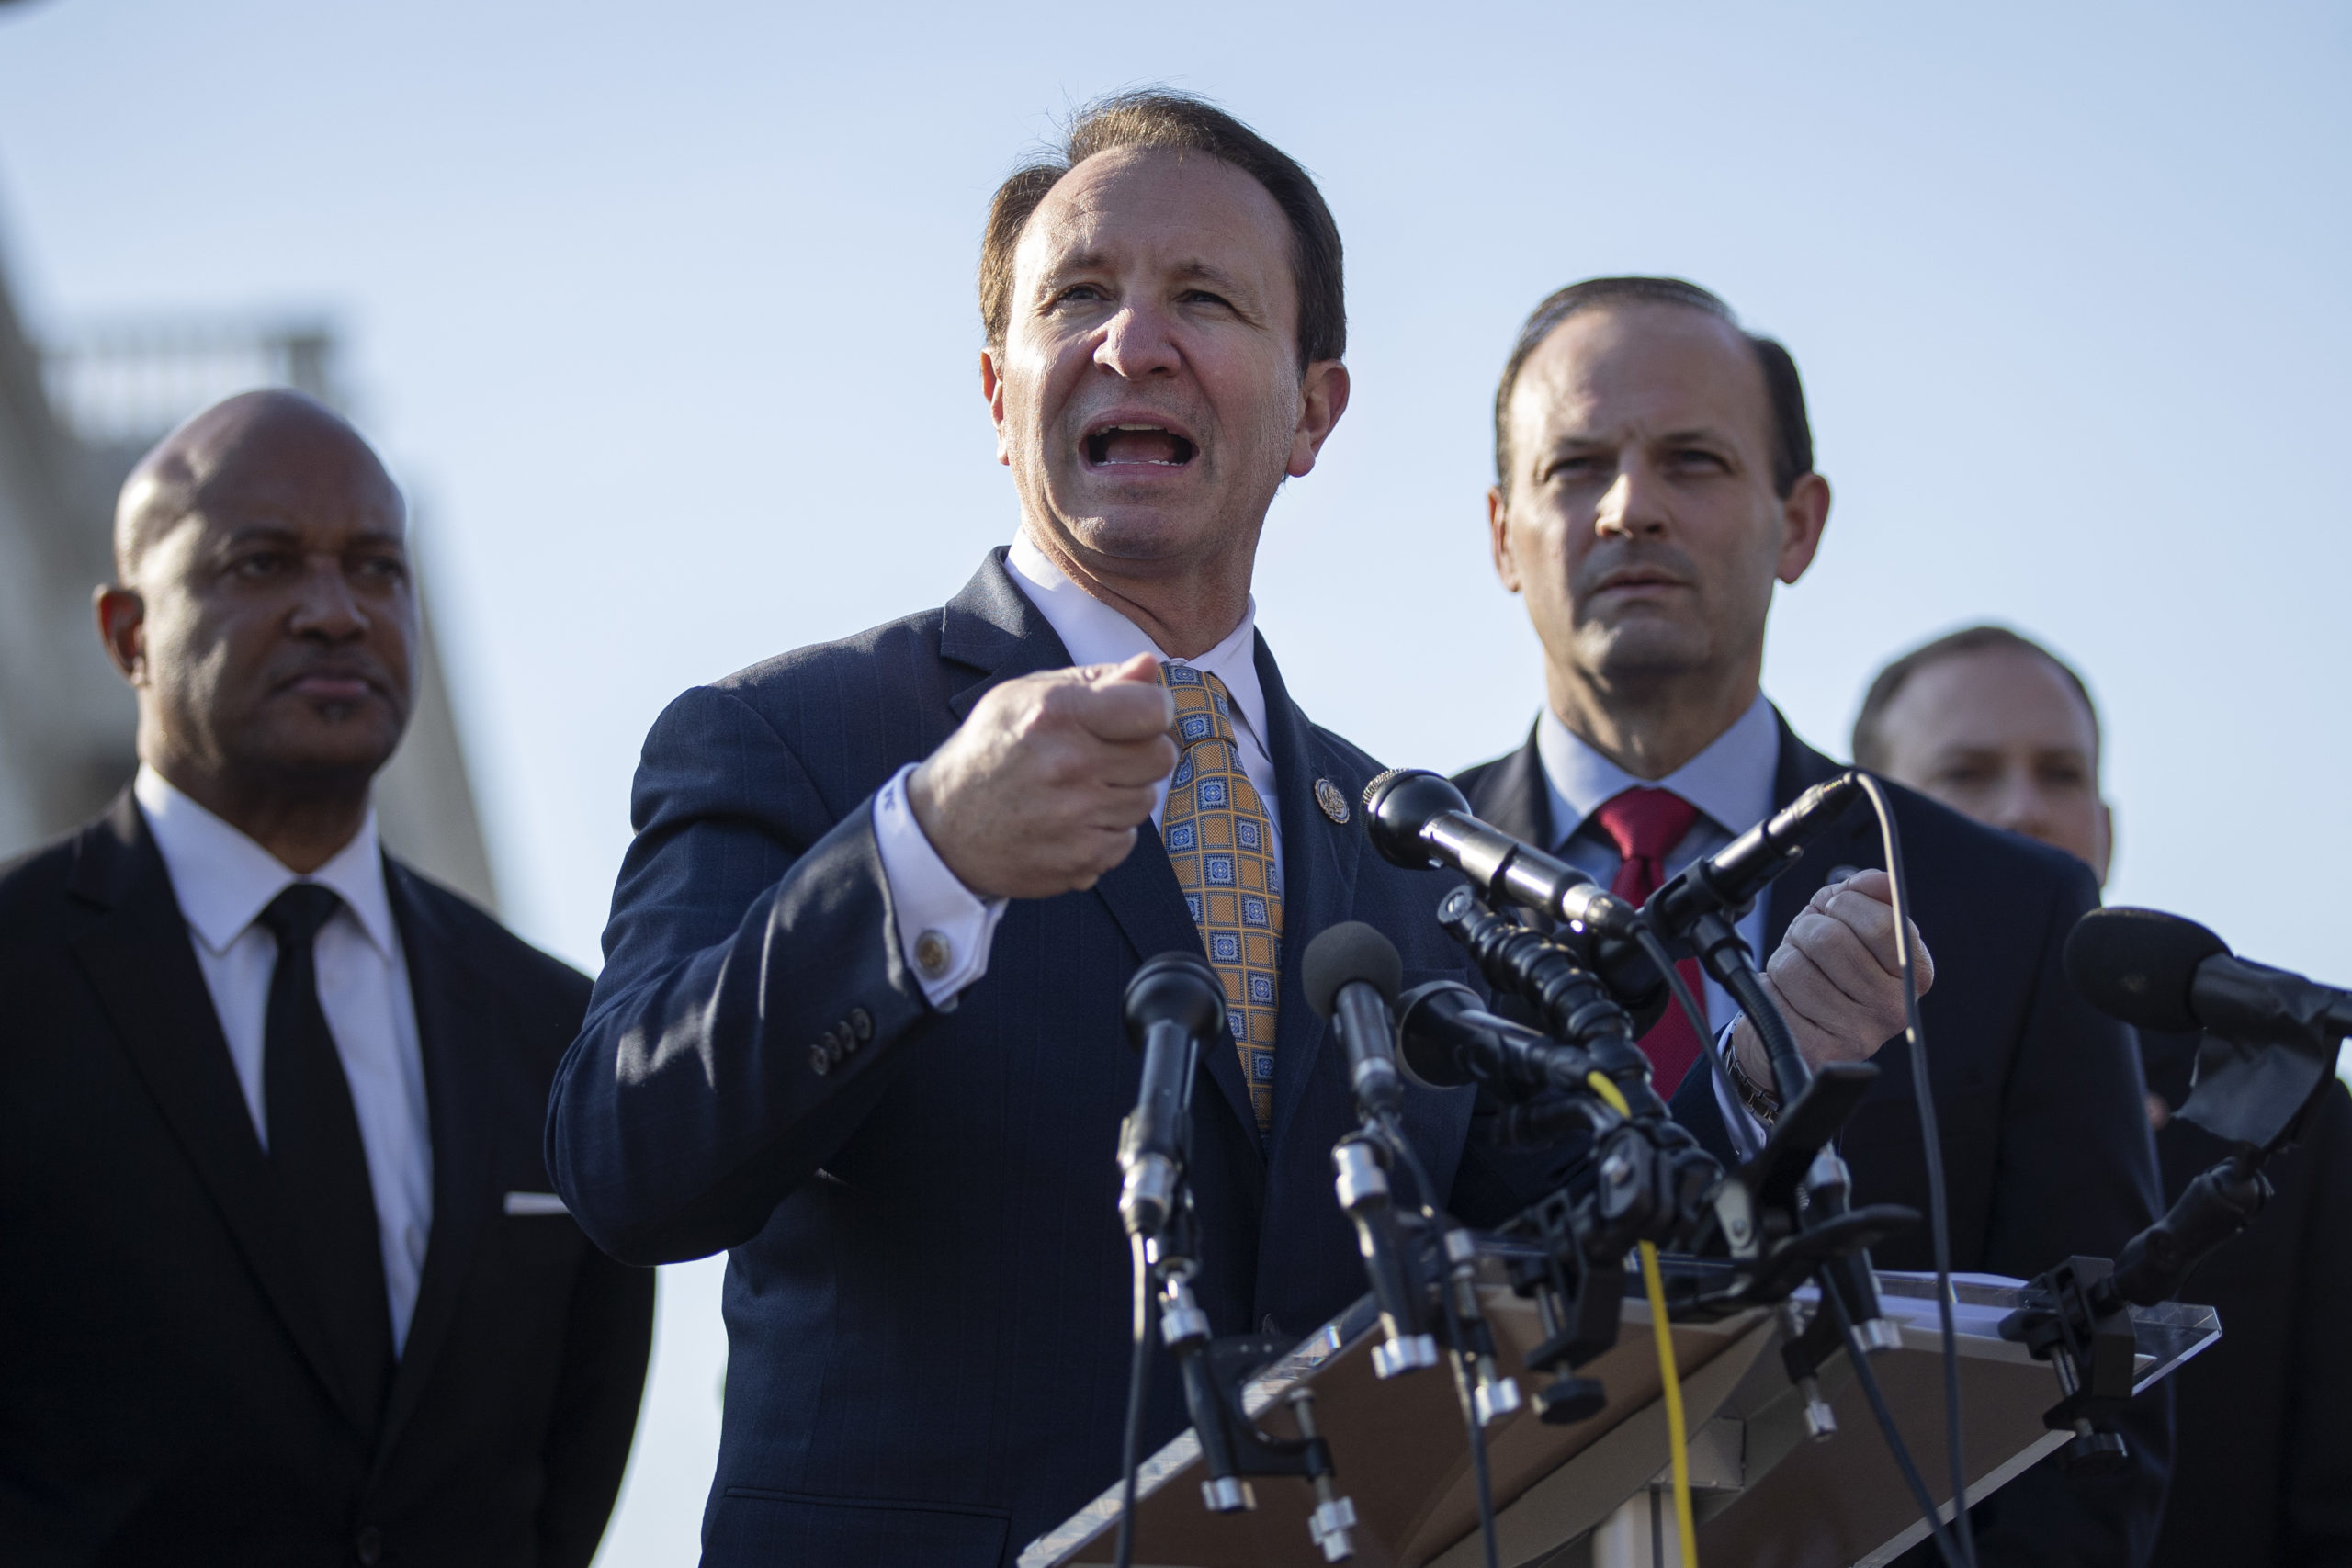 Louisiana Attorney General Jeff Landry and other attorneys general speak outside the U.S. Capitol on Jan. 22, 2020. (Drew Angerer/Getty Images)